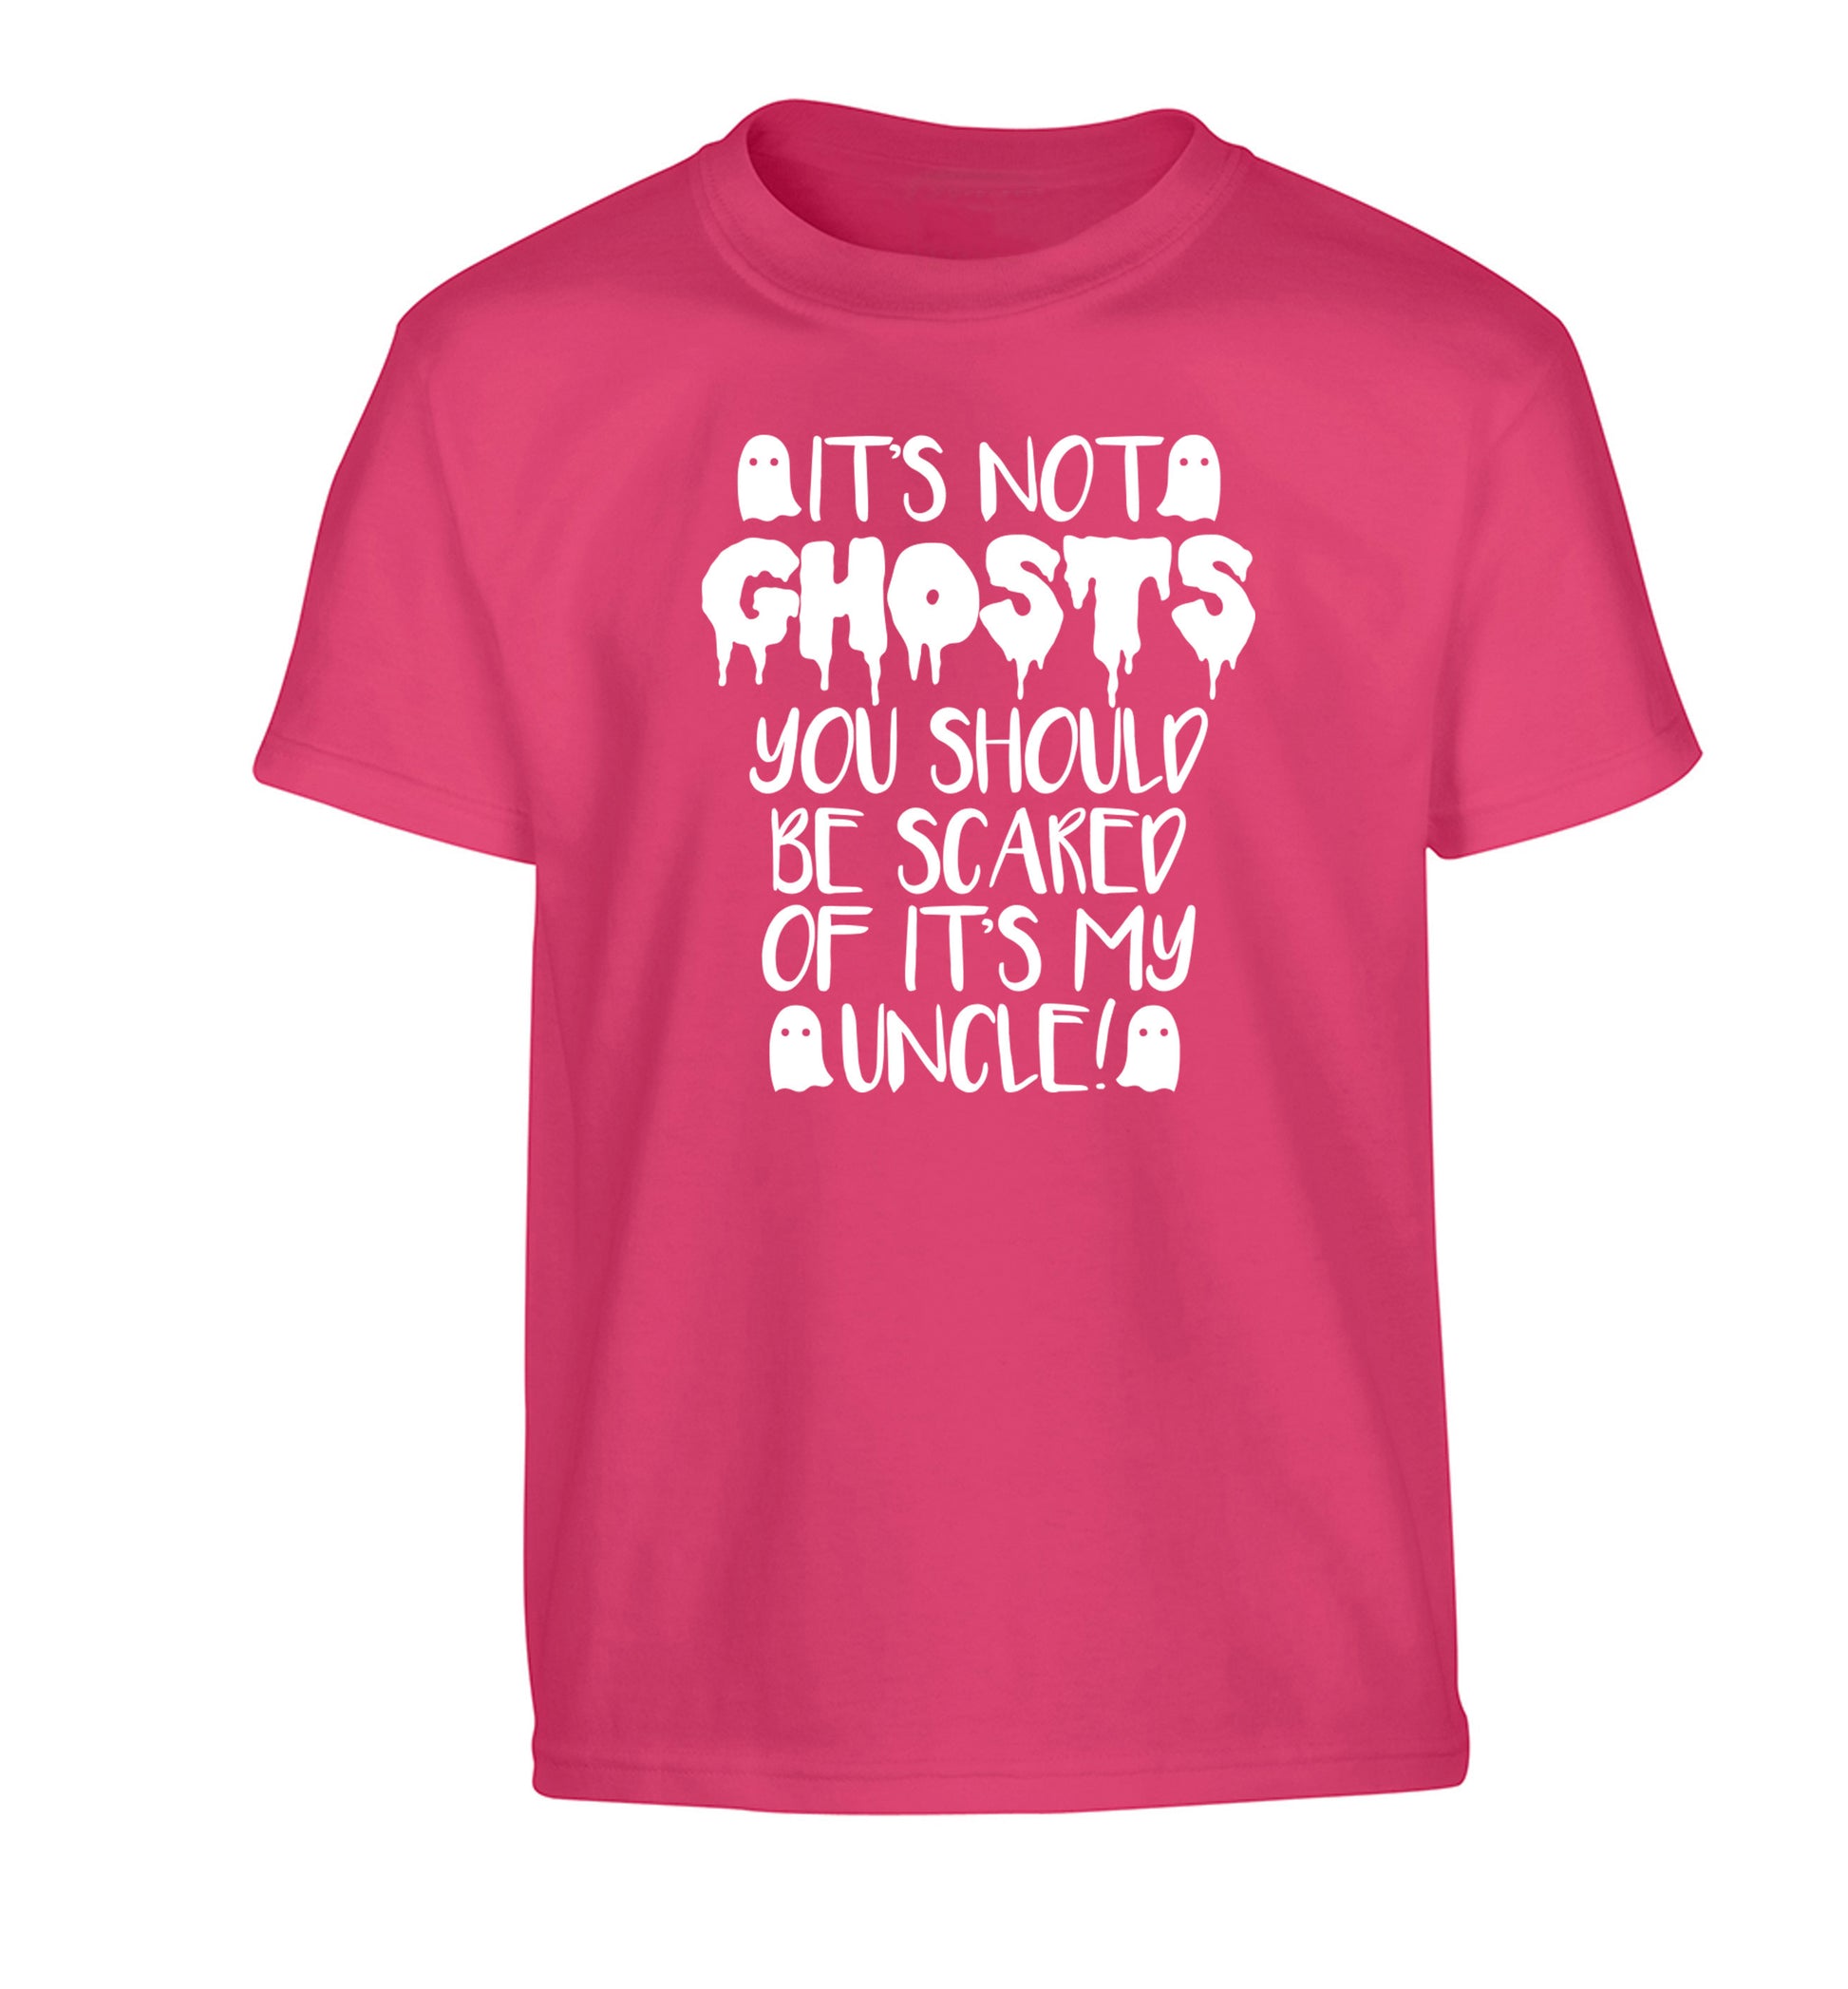 It's not ghosts you should be scared of it's my uncle! Children's pink Tshirt 12-14 Years